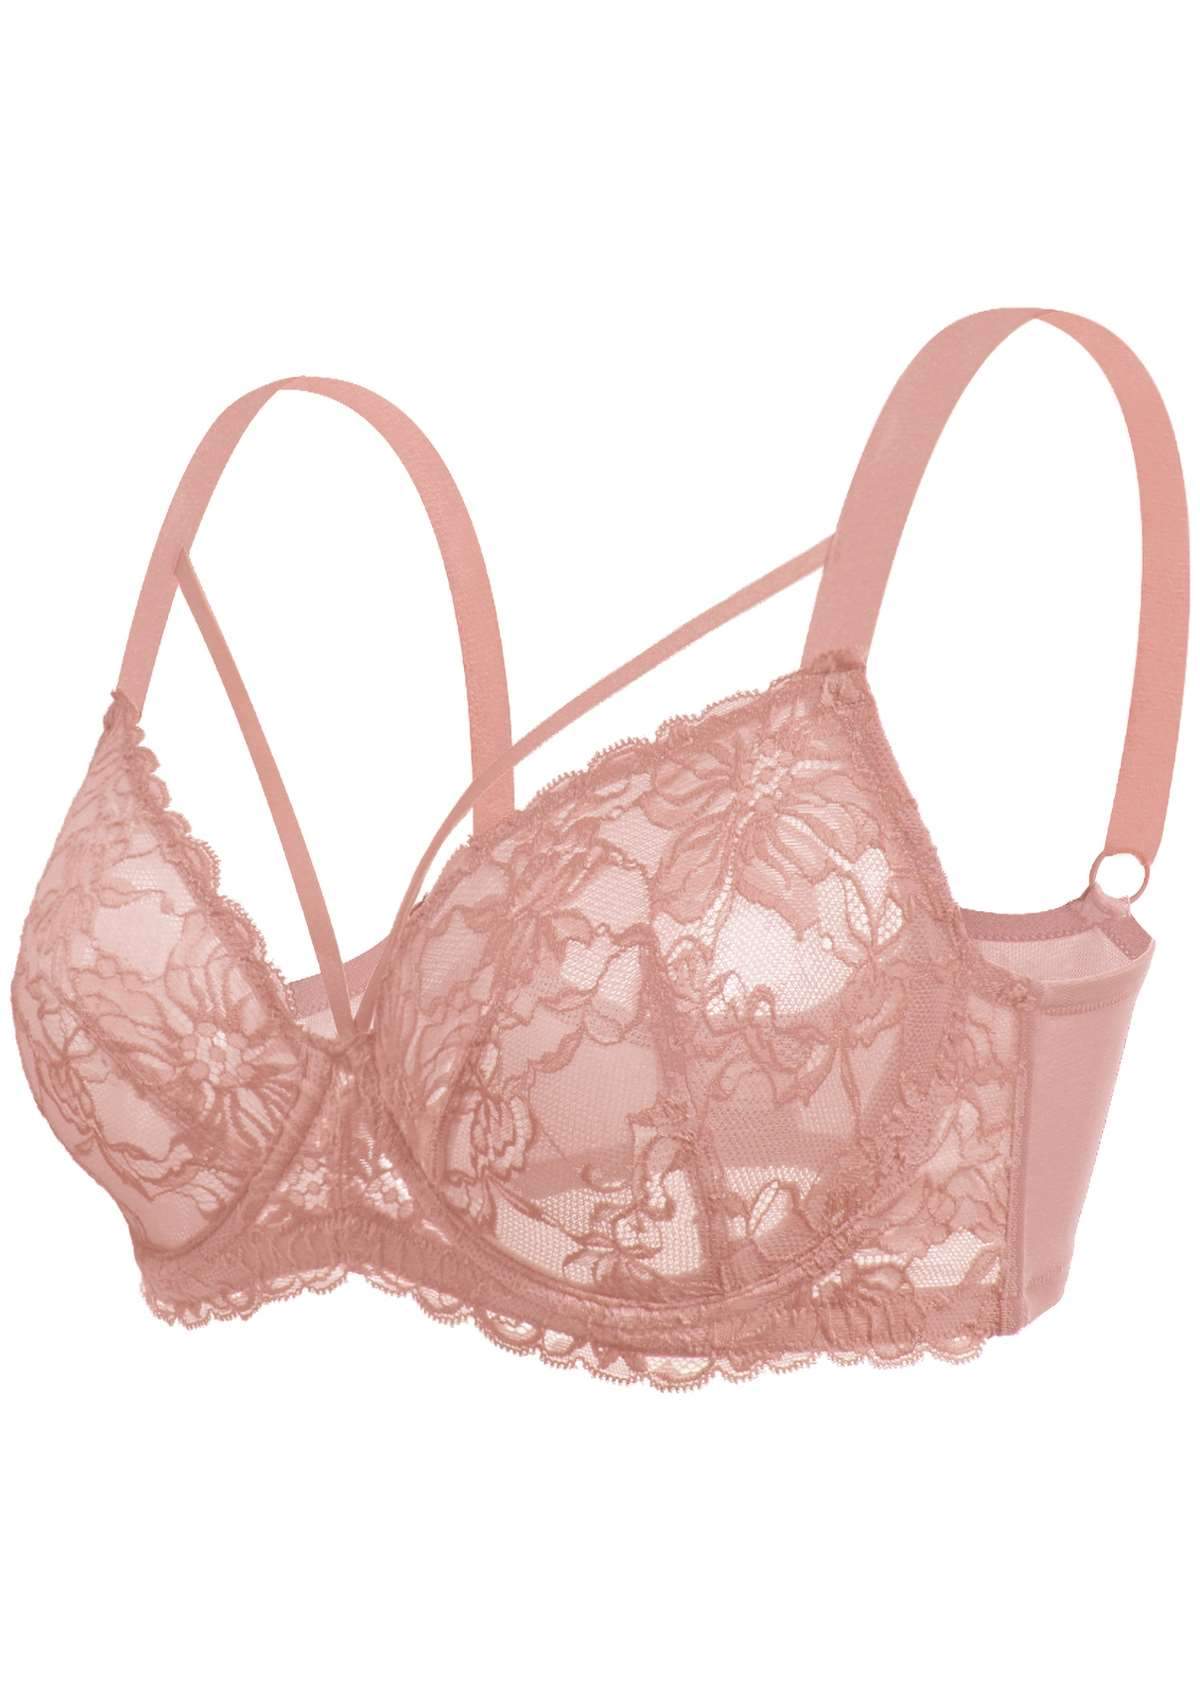 HSIA Pretty In Petals Lace Bra And Panty Sets: Bra For Big Boobs - Light Coral / 36 / DDD/F